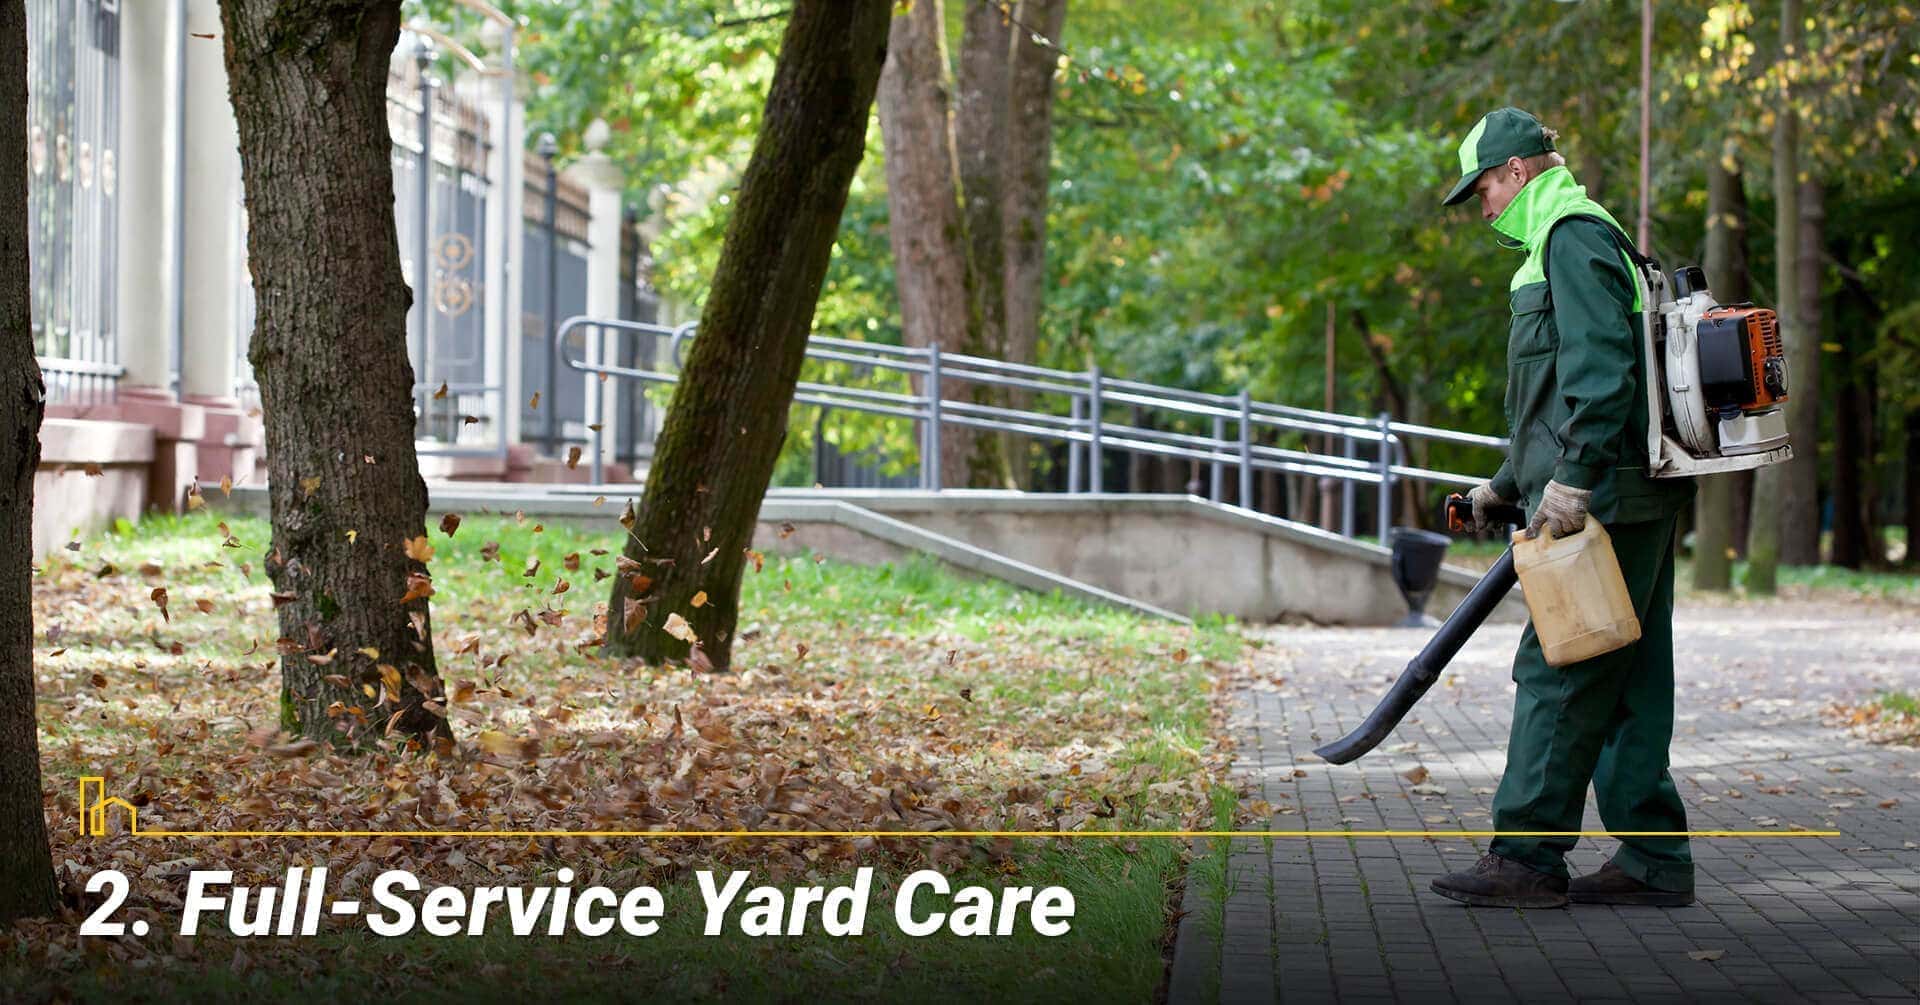 Full-Service Yard Care, hire out the yard works